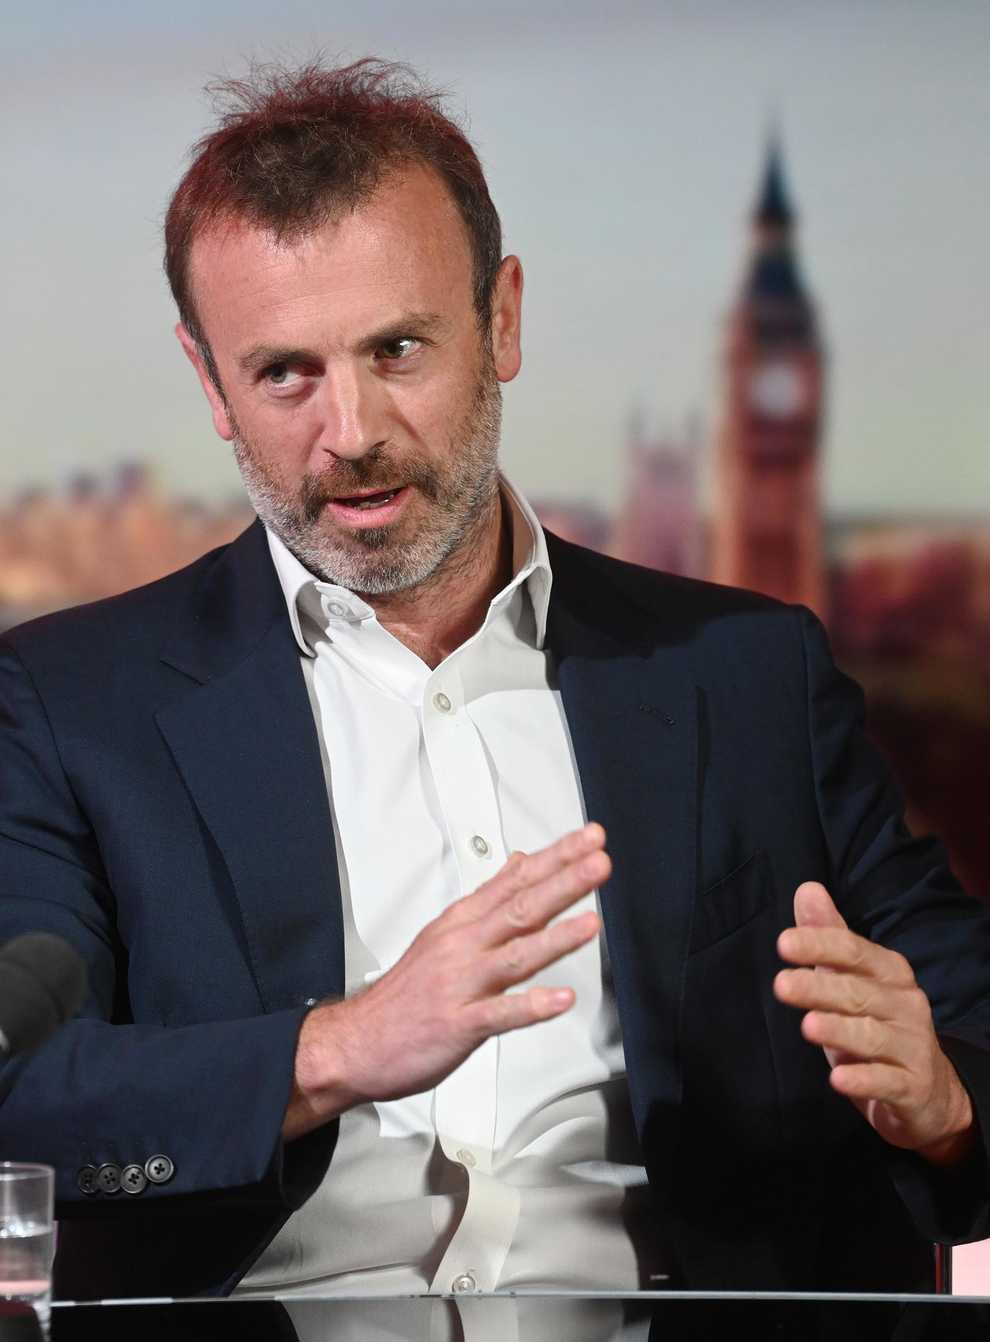 Ovo founder Stephen Fitzpatrick has outlined proposals calling on the Government to provide help with bills which would offer the most support to the poorest families (Jeff Overs/BBC/PA)